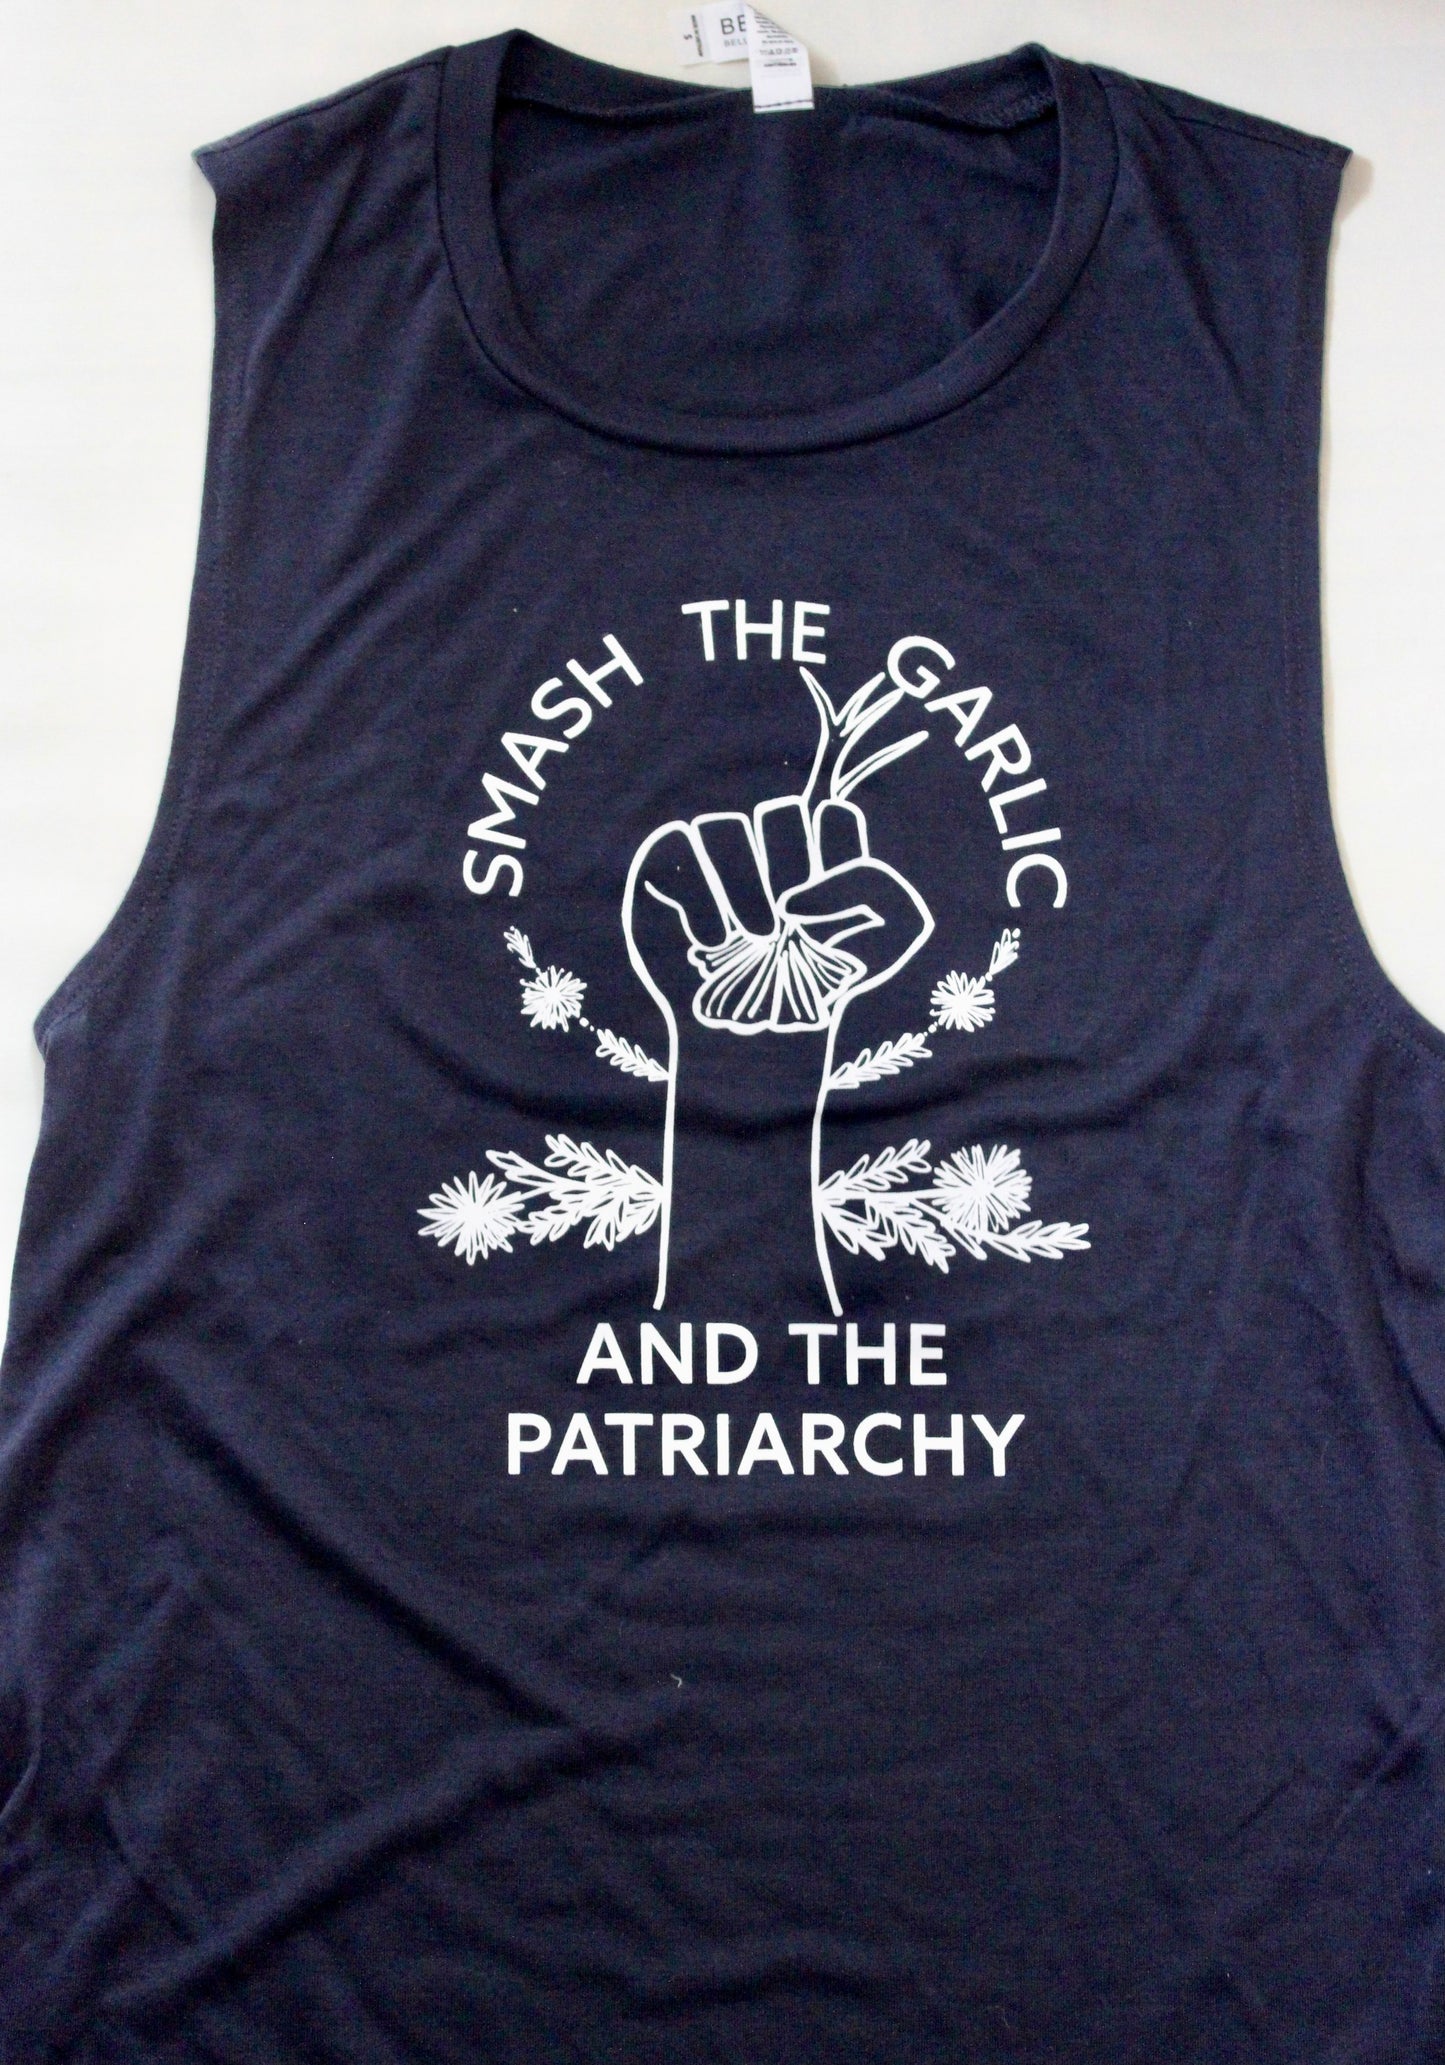 A navy blue tank top reads "Smash the Garlic and the Patriarchy" in white block letters with an illustration of a hand holding garlic 